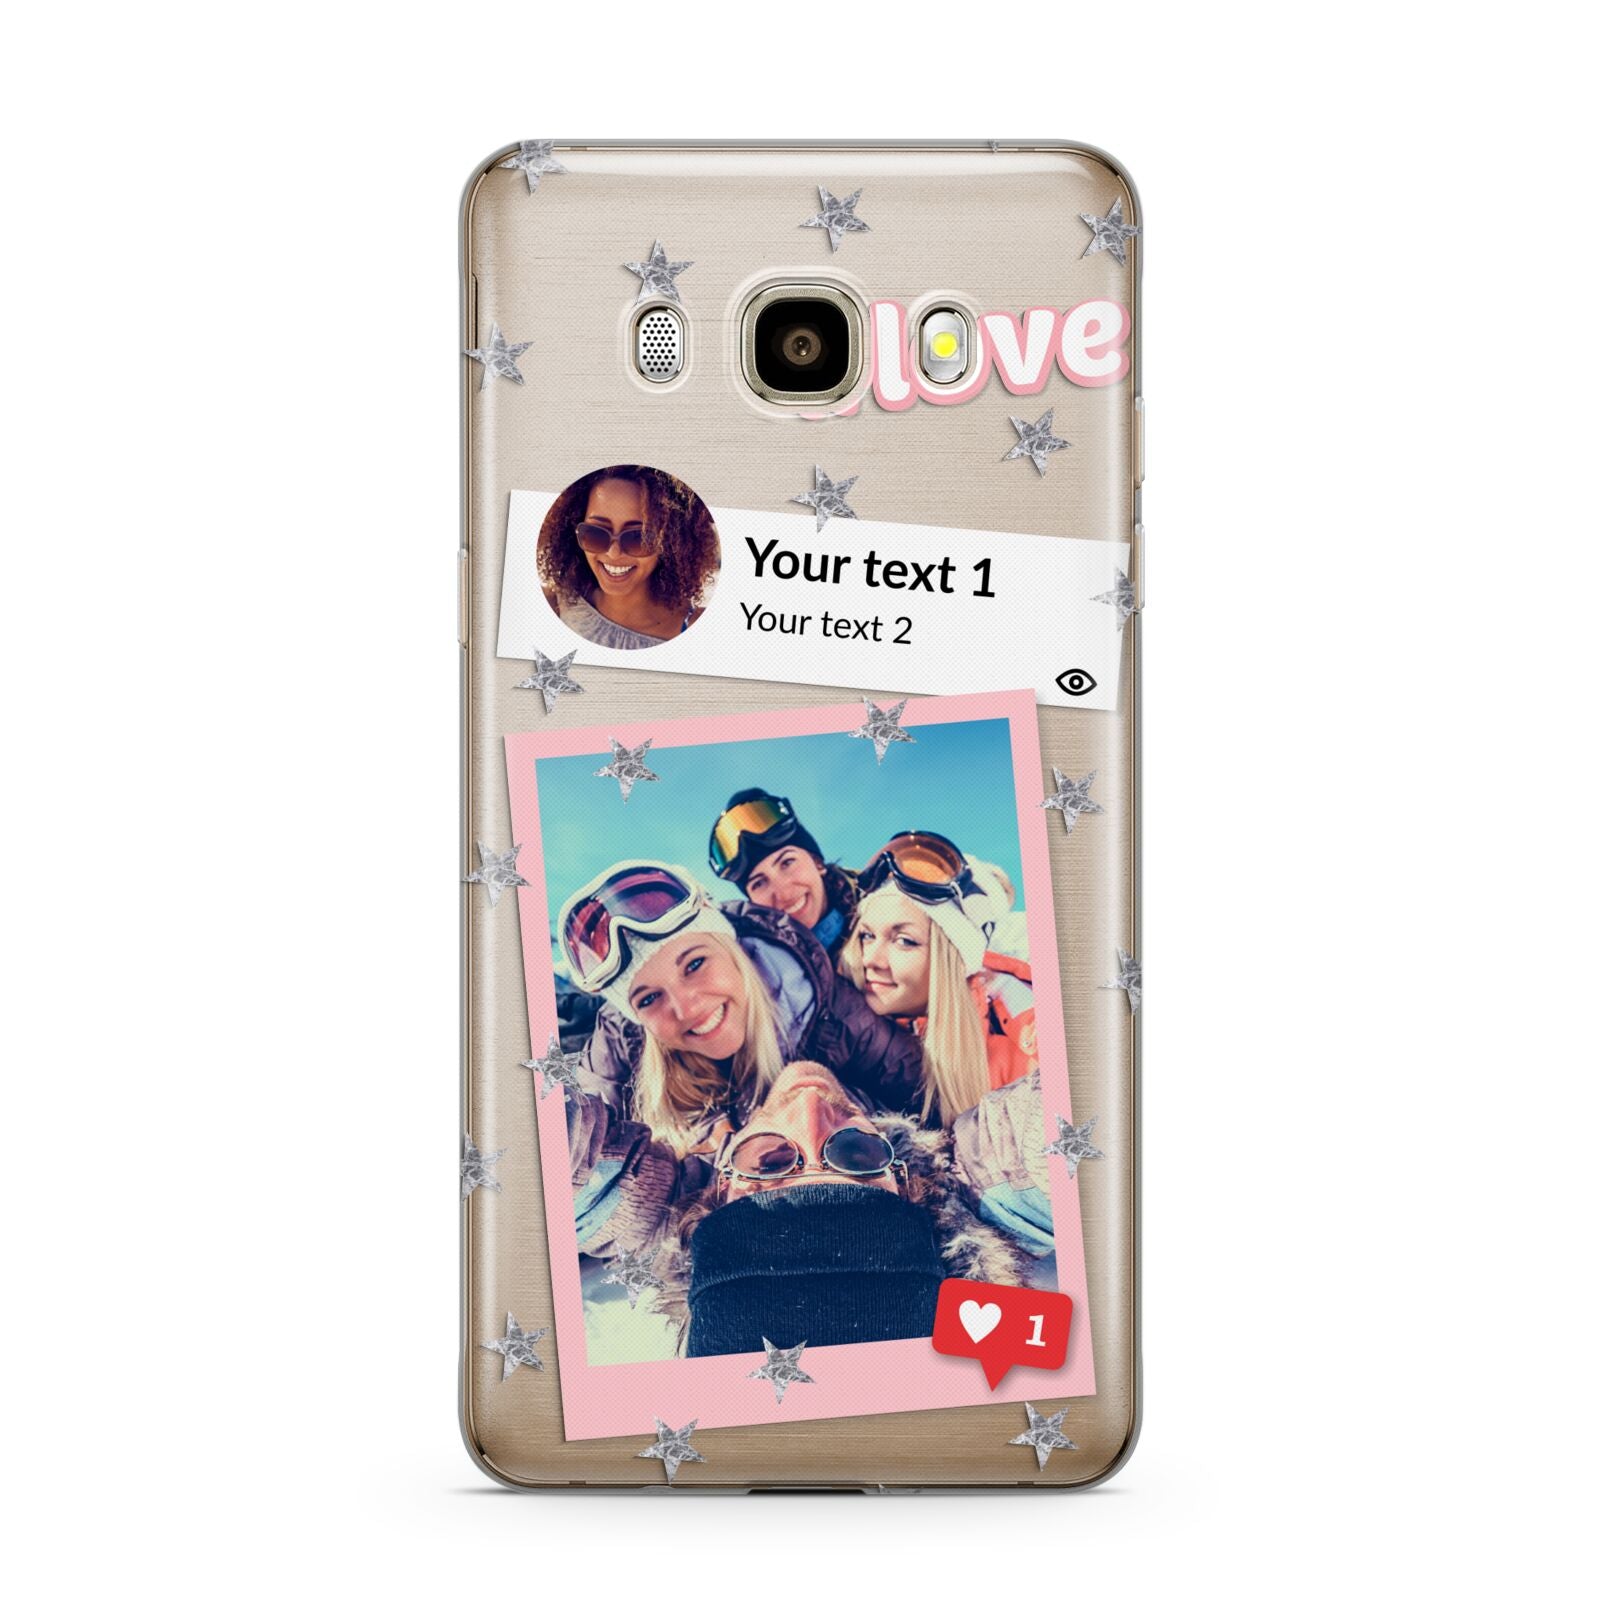 Starry Social Media Photo Montage Upload with Text Samsung Galaxy J7 2016 Case on gold phone